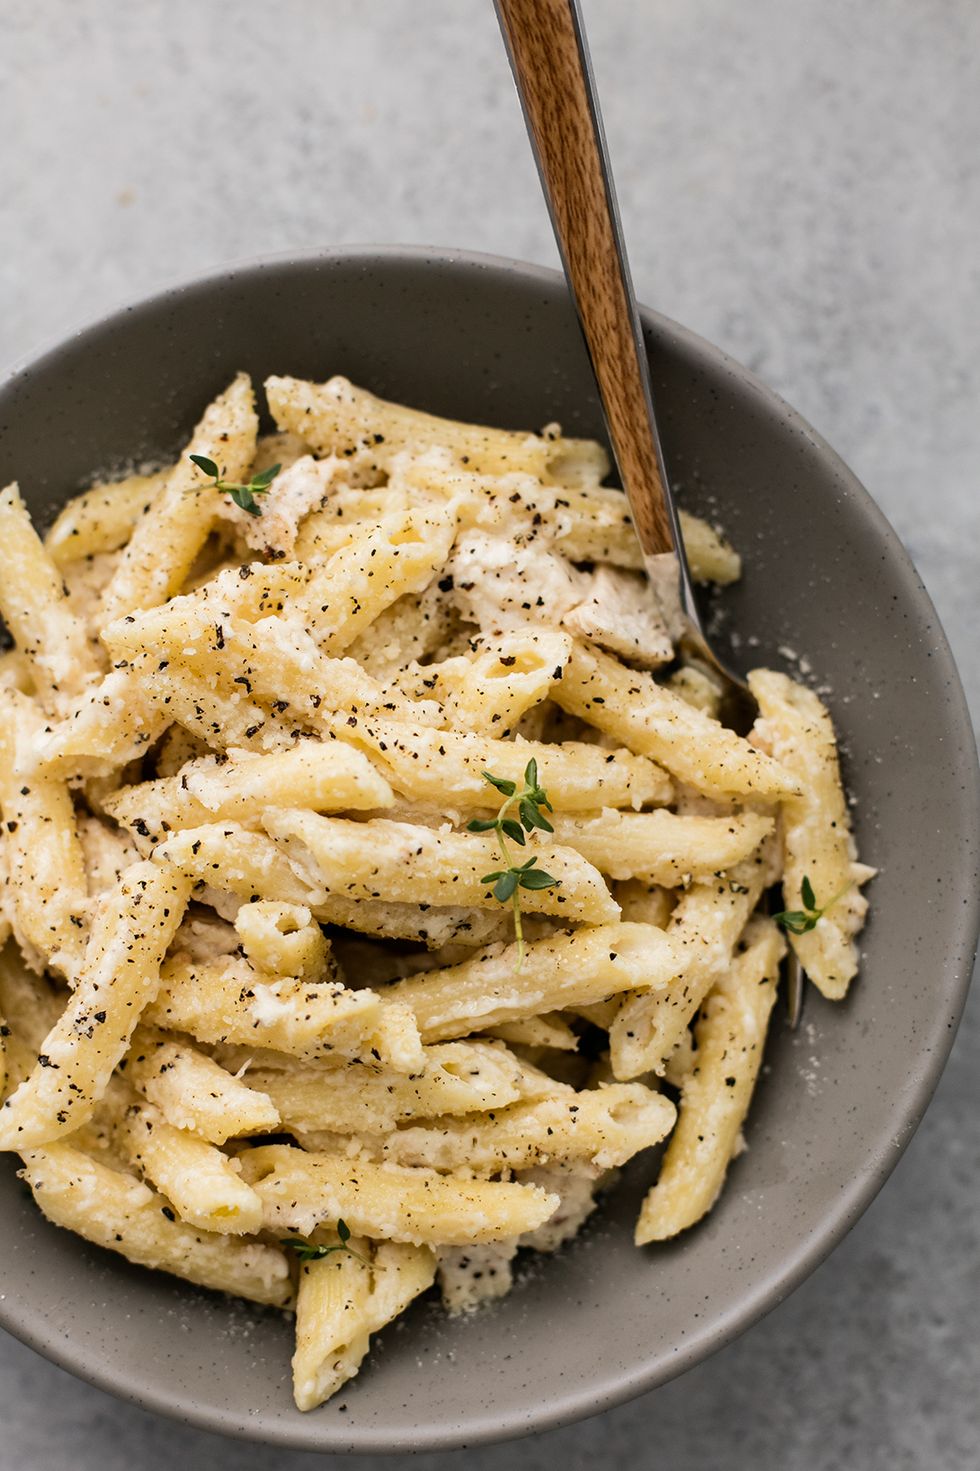 12 Yummy Penne Pasta Recipes - The clever meal